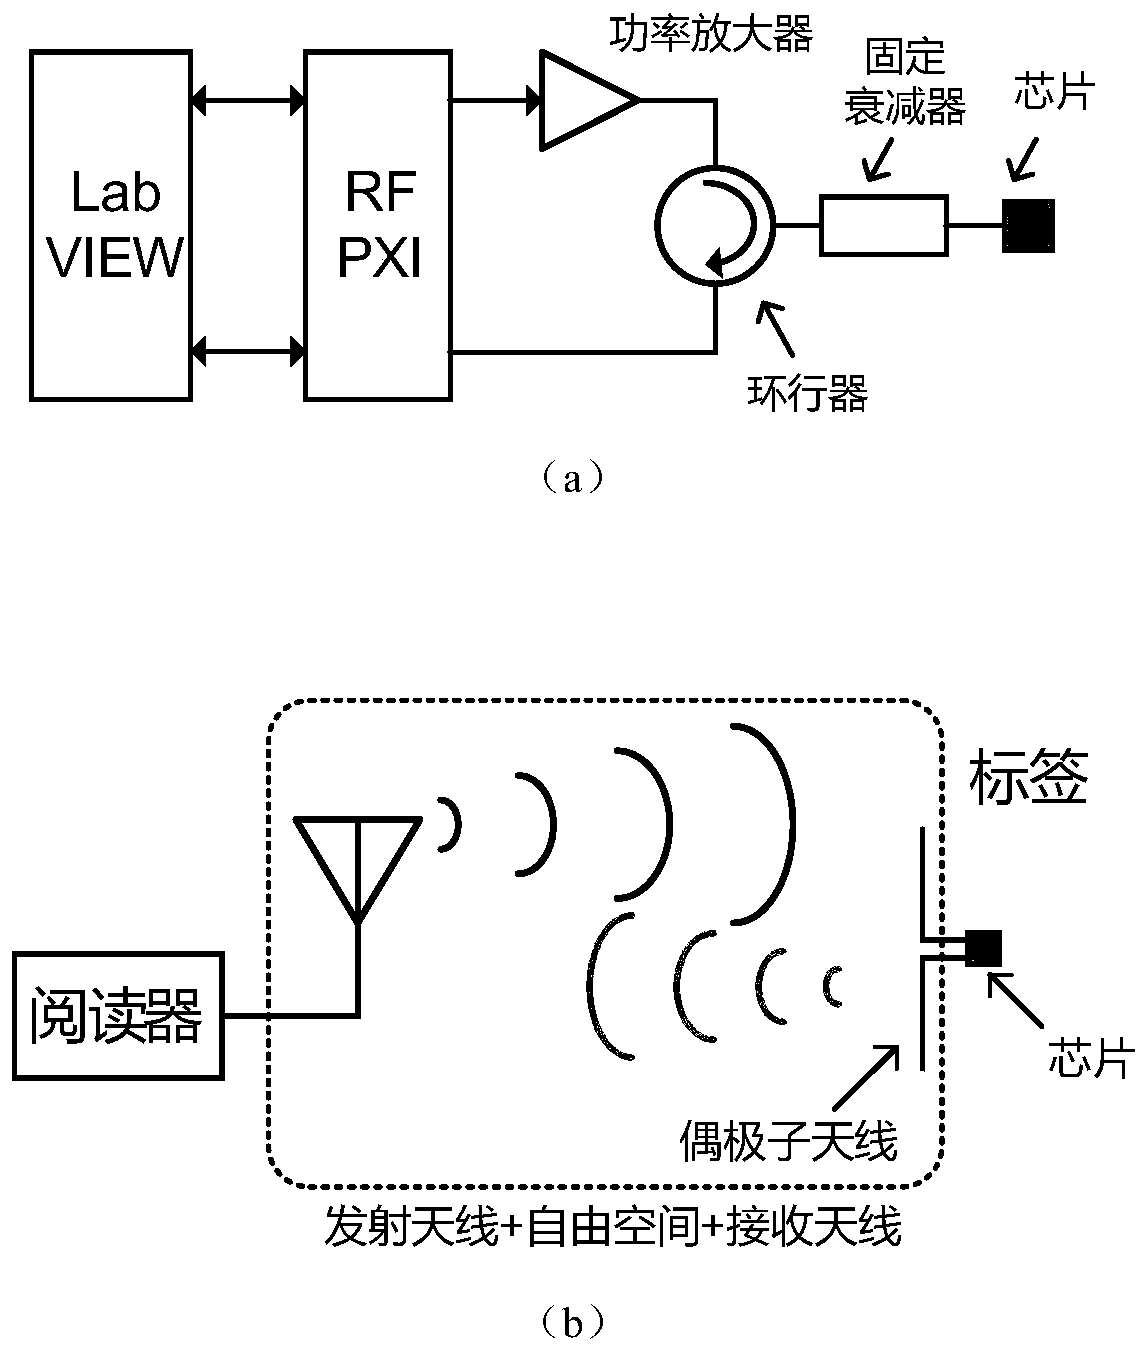 Verification test method and device for ultrahigh-frequency RFID tag